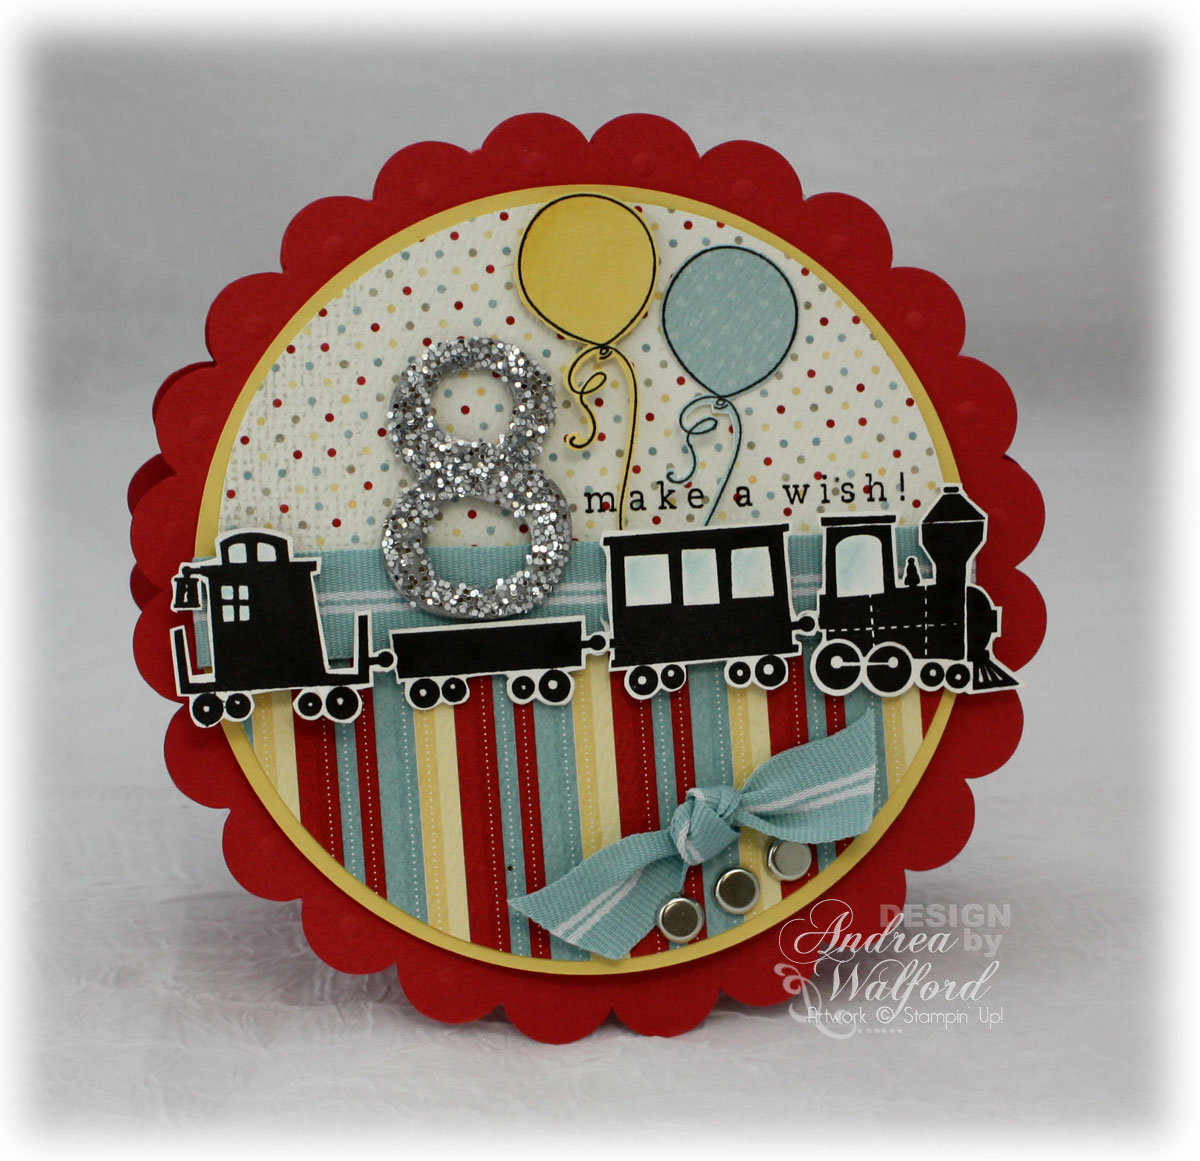 Stampin Up Boy Birthday Card Ideas Choo Choo Birthday Card Day 2 Of The Comment A Day Contest